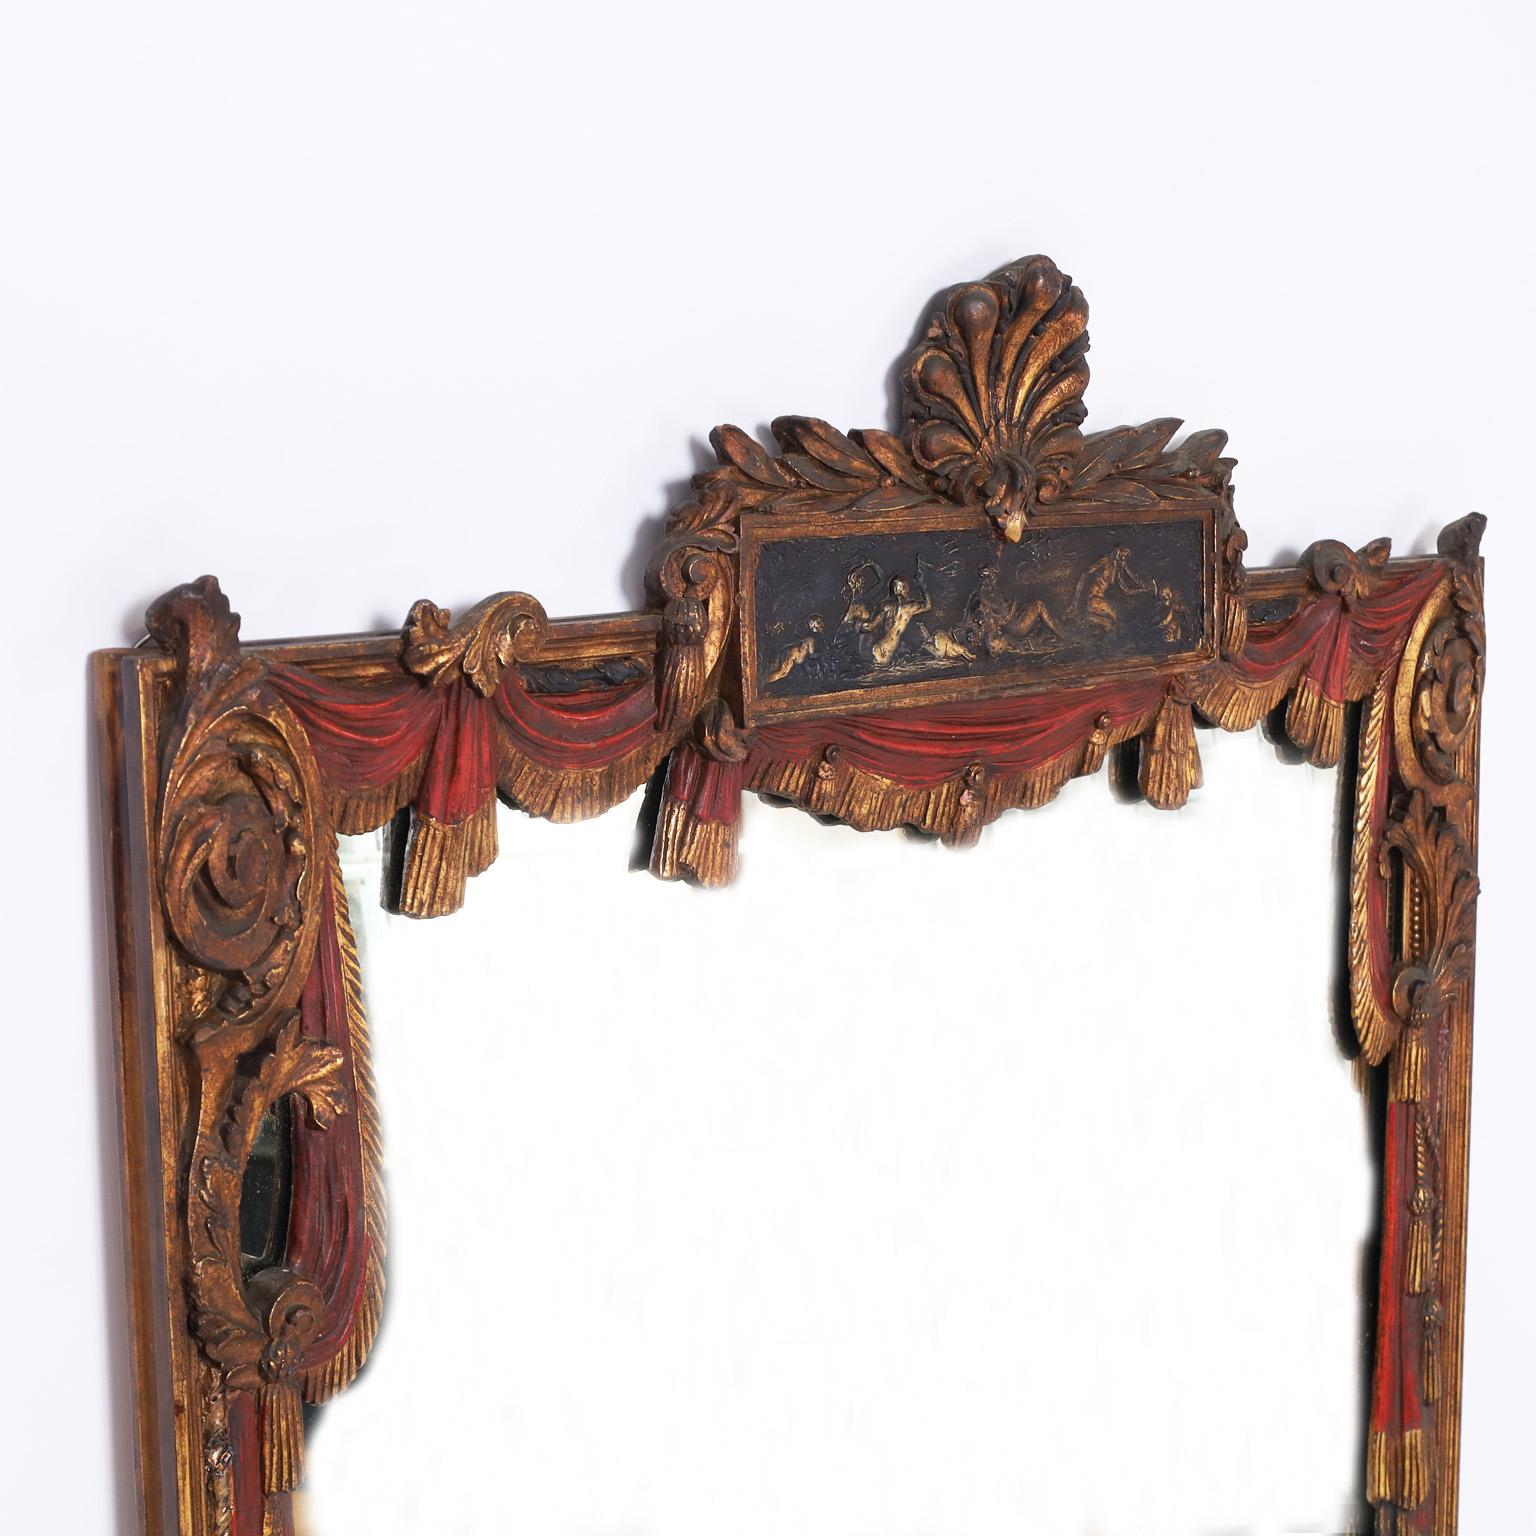 Dramatic antique wall mirror crafted in hardwood, carved and polychromed with theatrical motifs, featuring seashells, rope and tassel, curtains and crest panel with nudes. Once hung in the lobby of the Olympia theater in Miami.